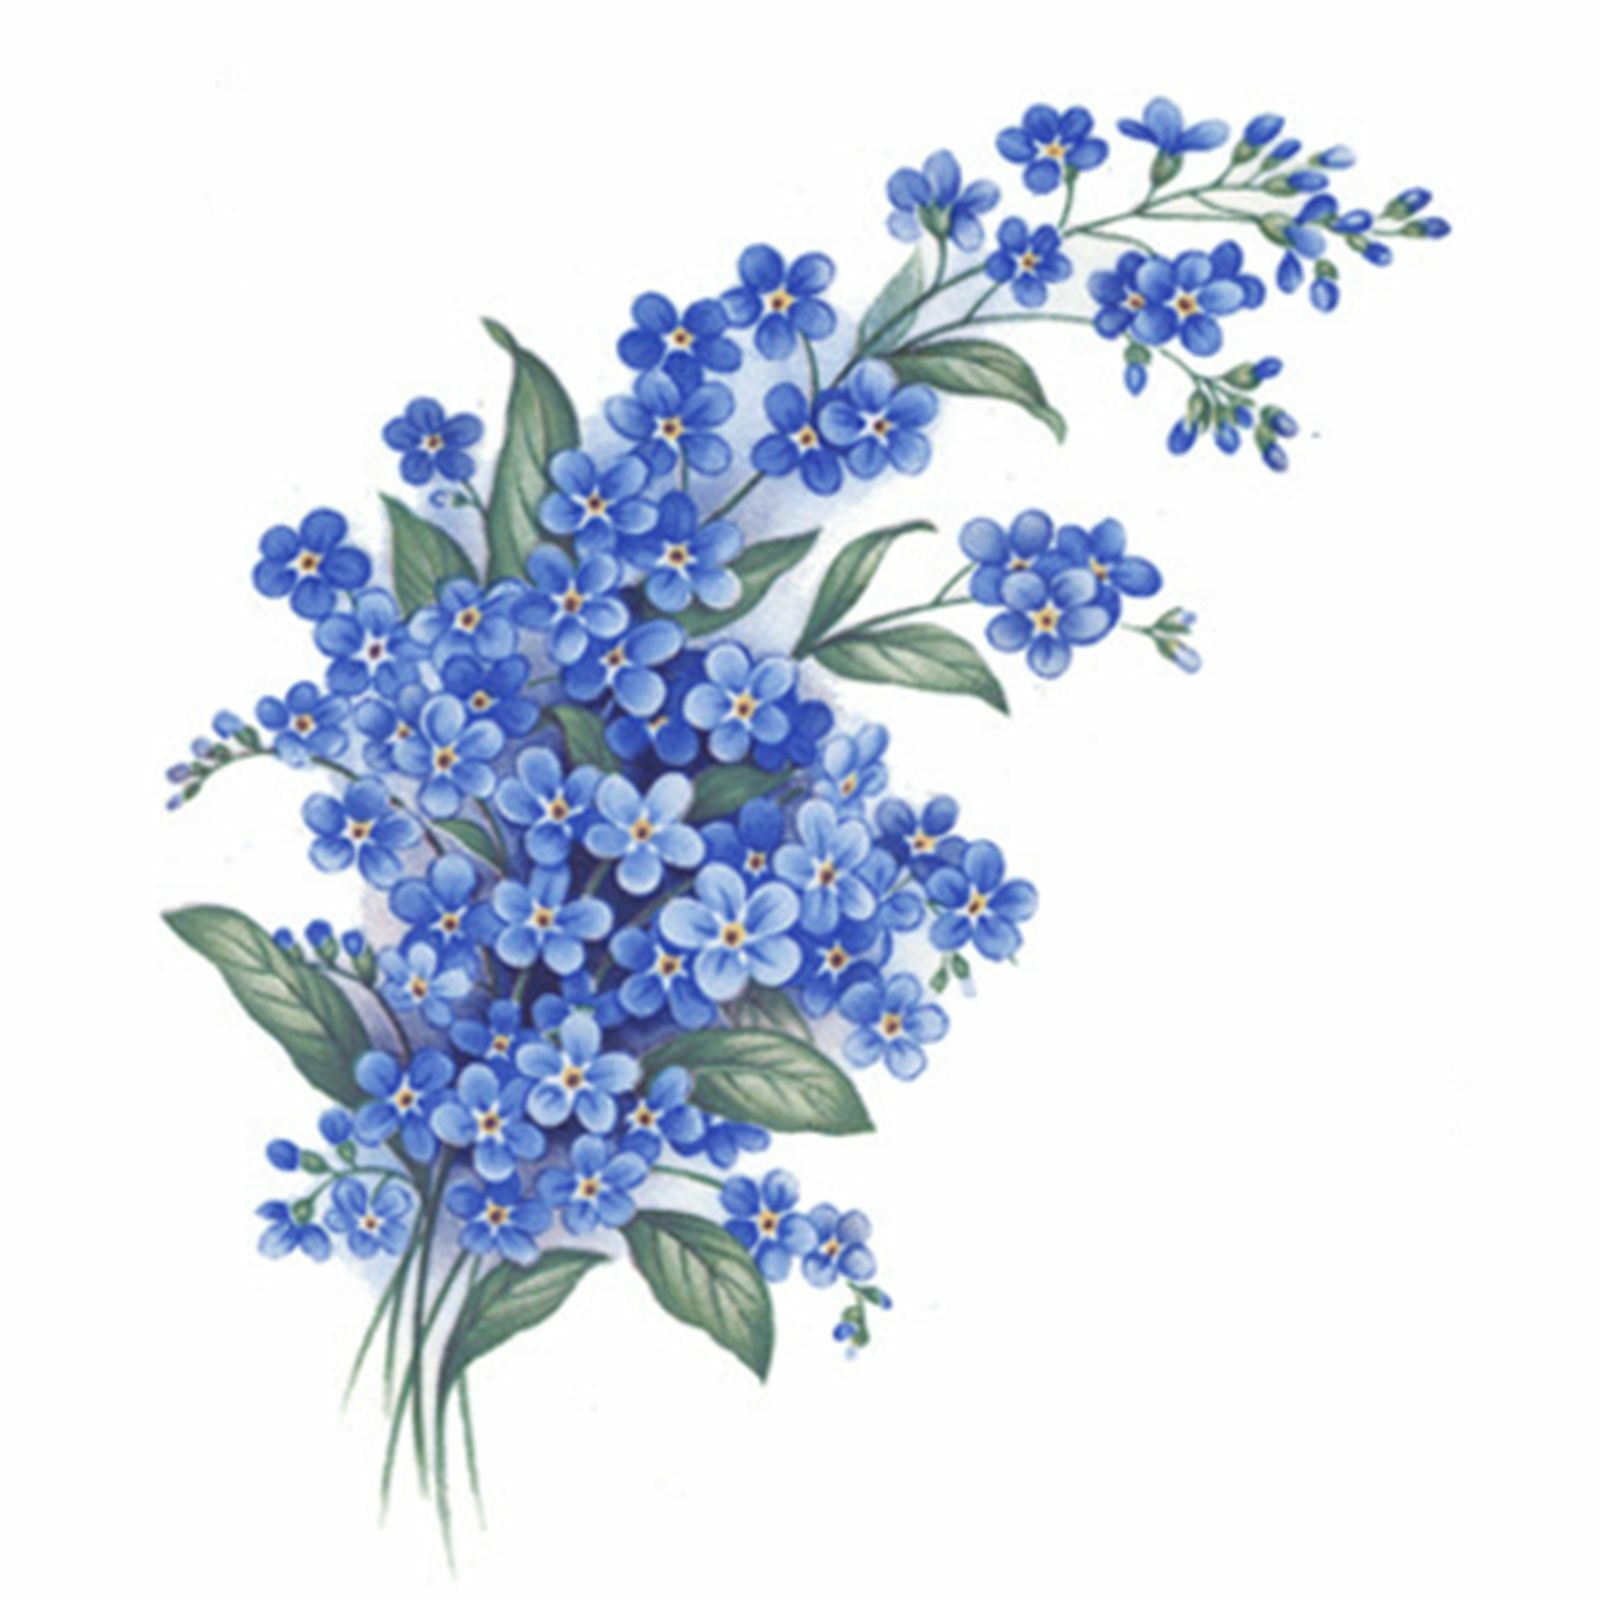 Forget Me Not Knot Blue Flowers Select-a-size Ceramic Waterslide Decals Bx